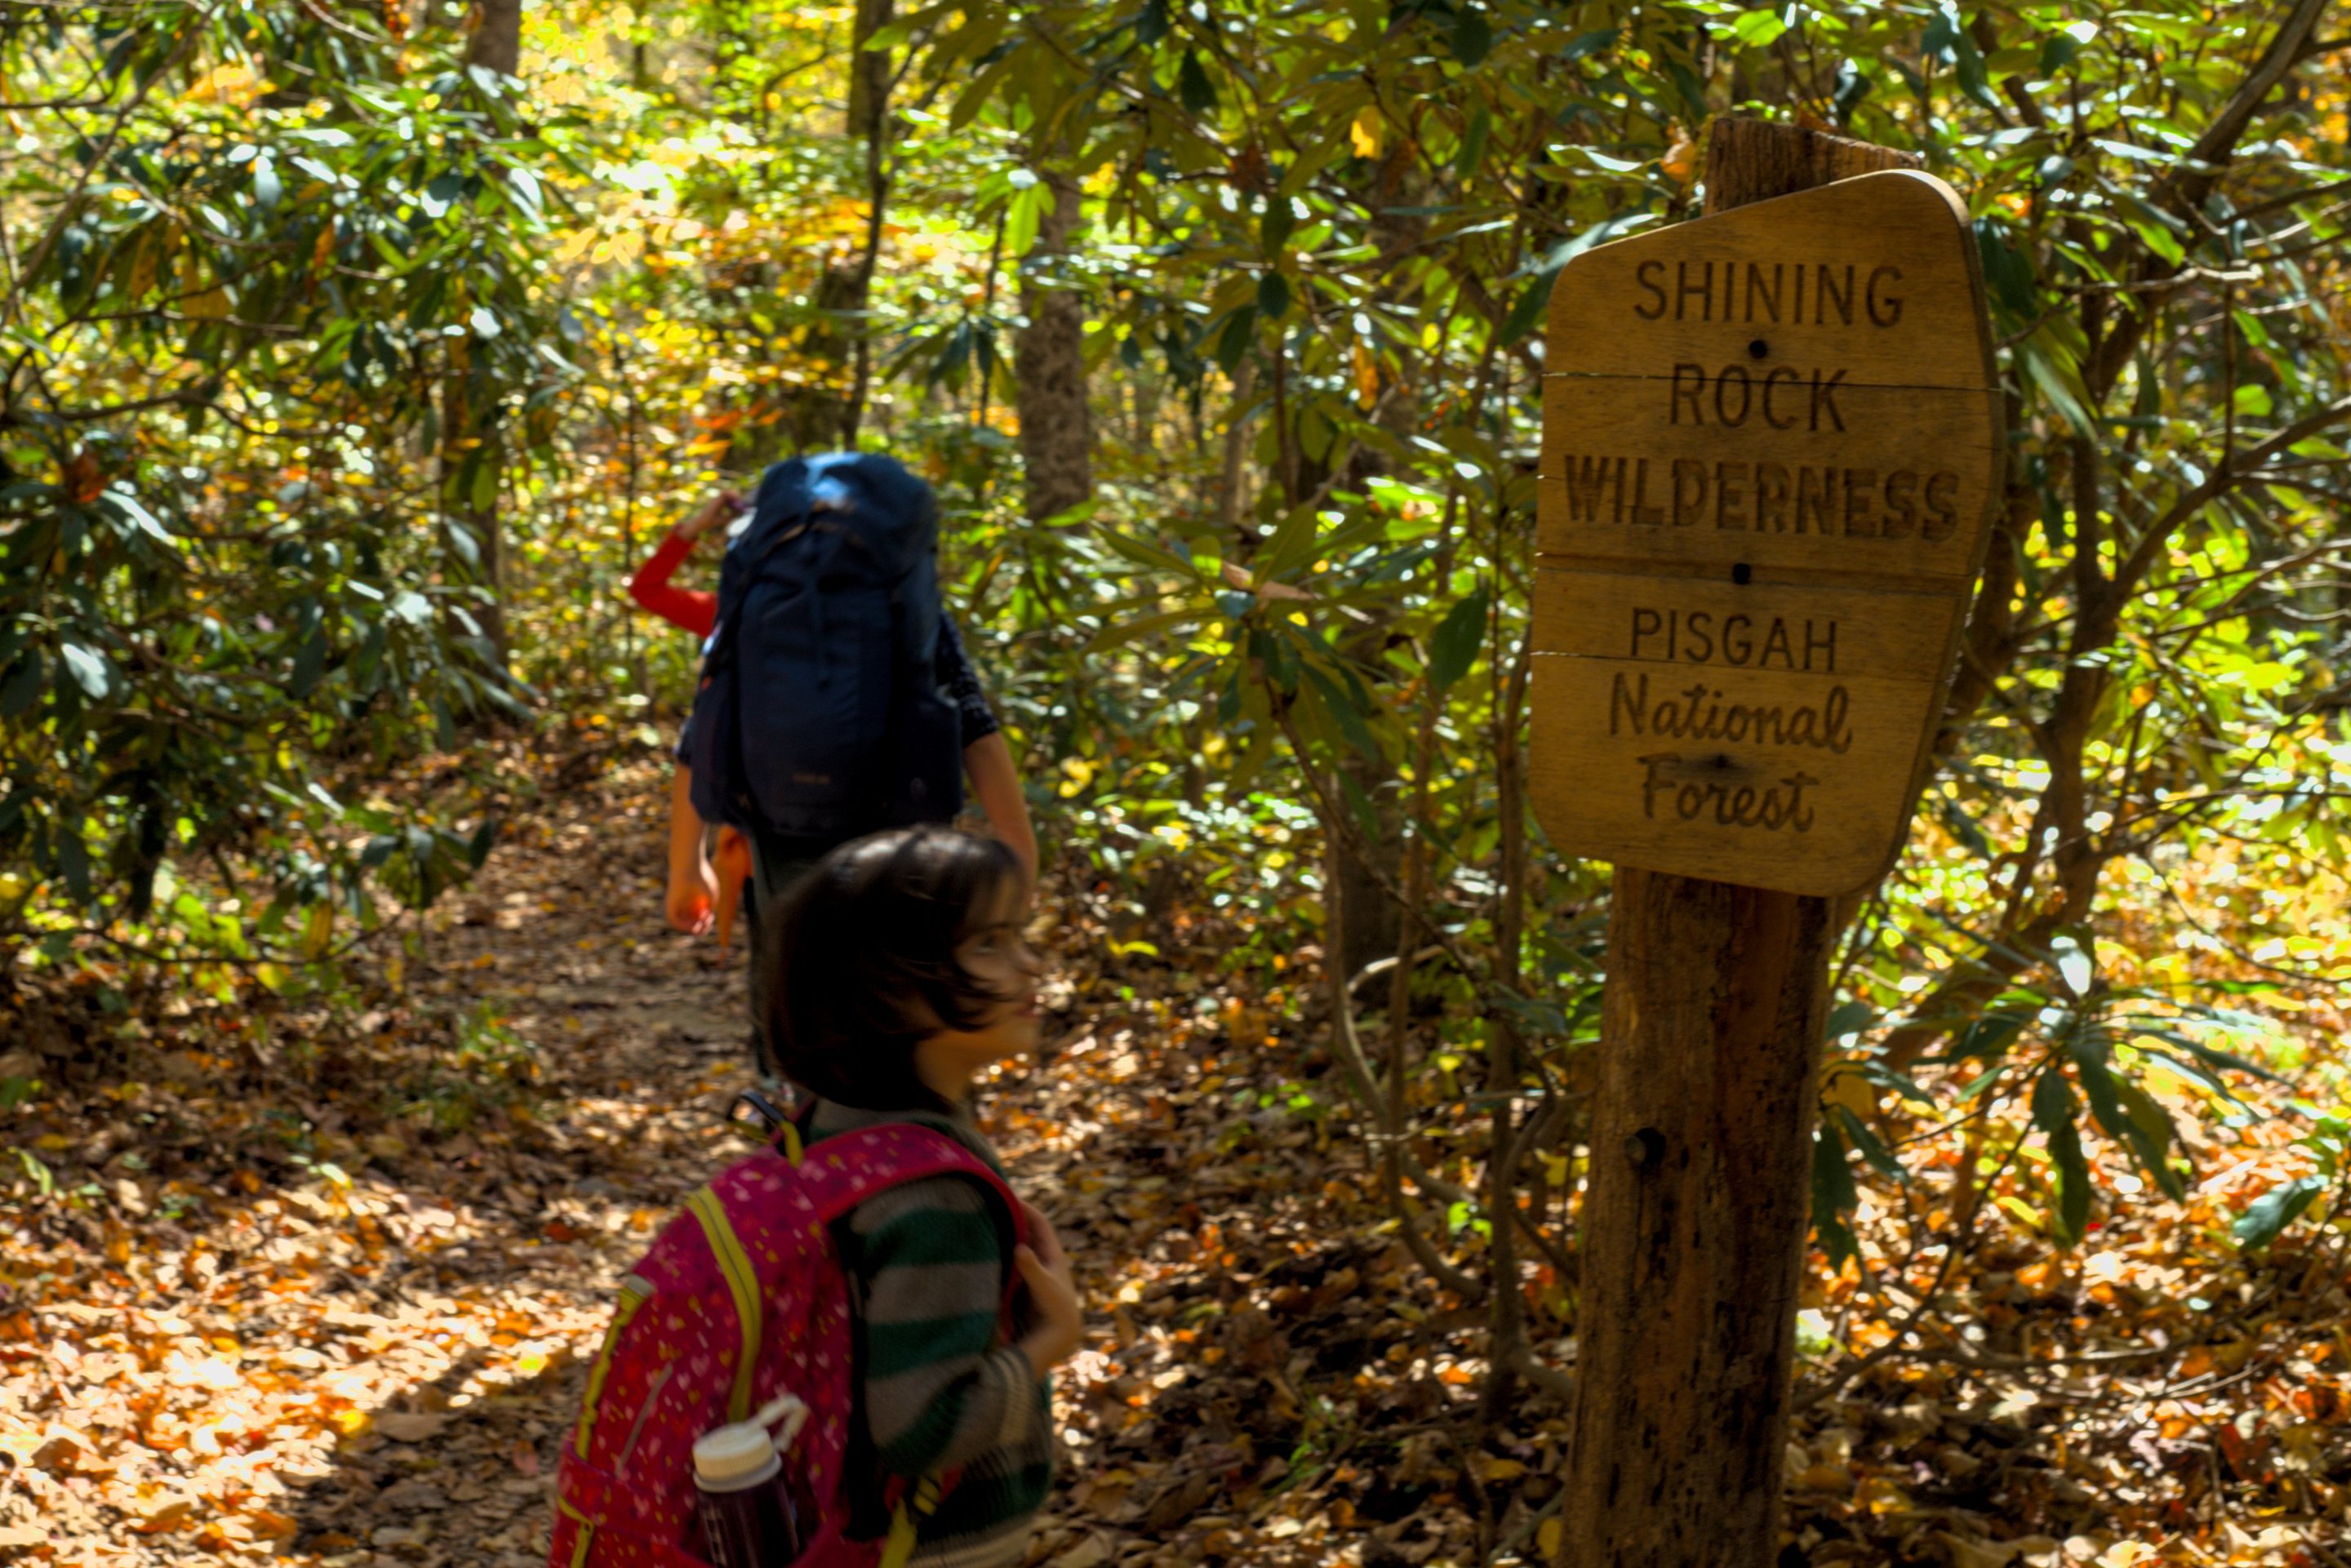 Shining Rock Wilderness sign photographed by luxagraf